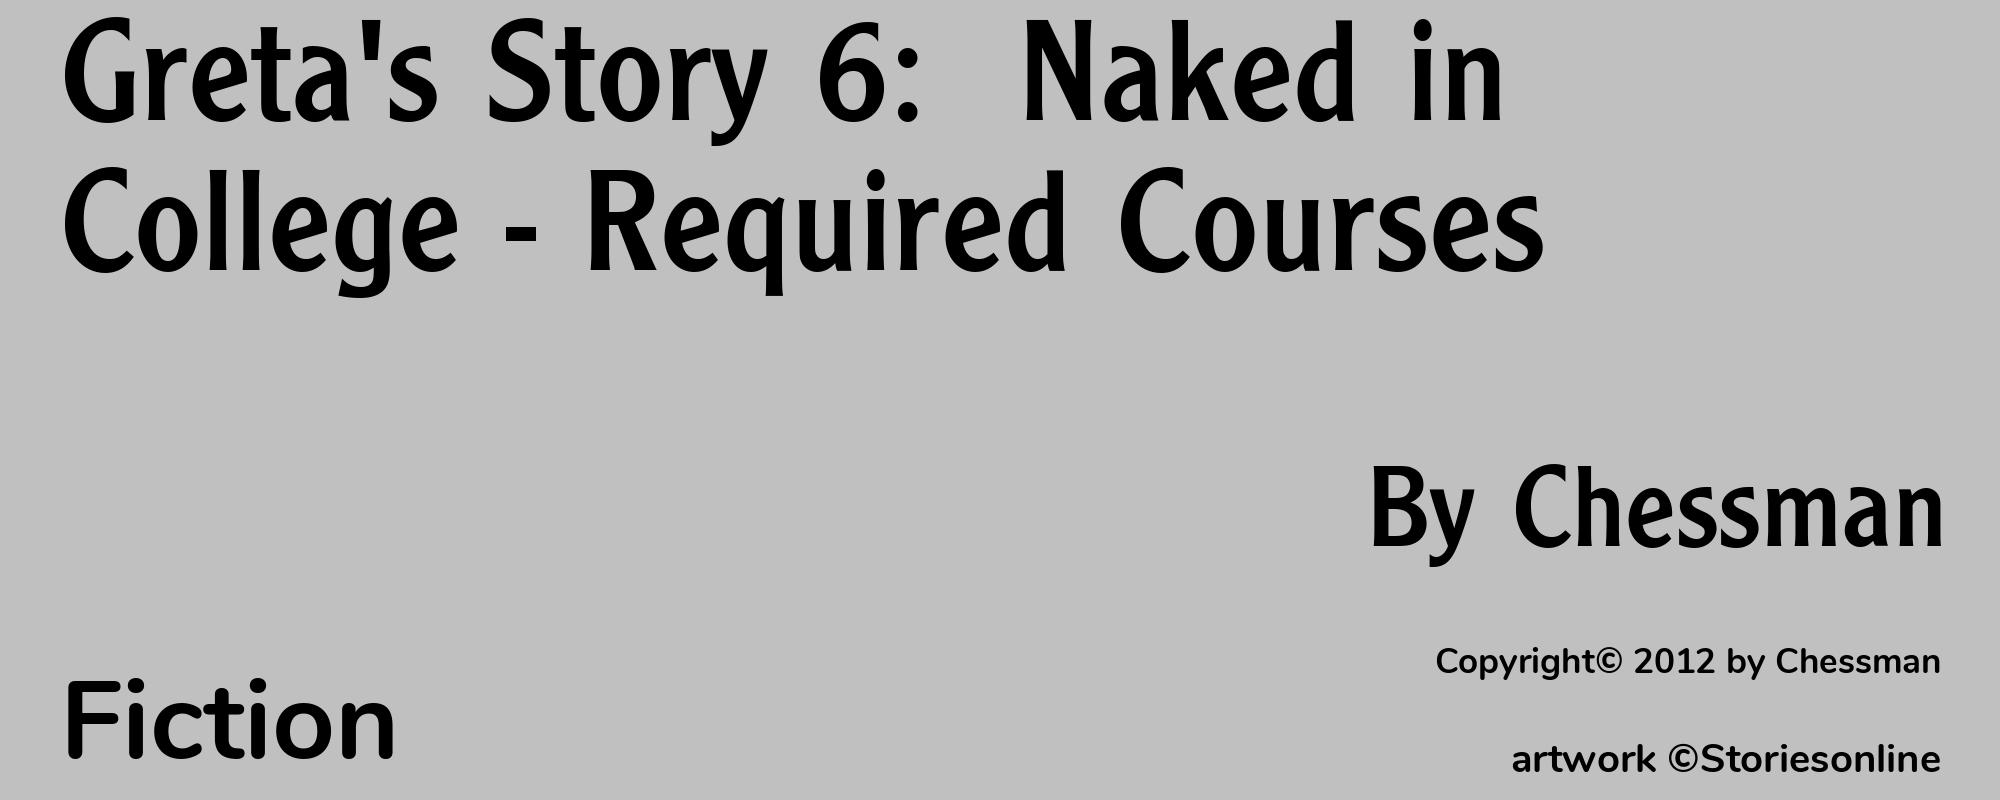 Greta's Story 6:  Naked in College - Required Courses - Cover